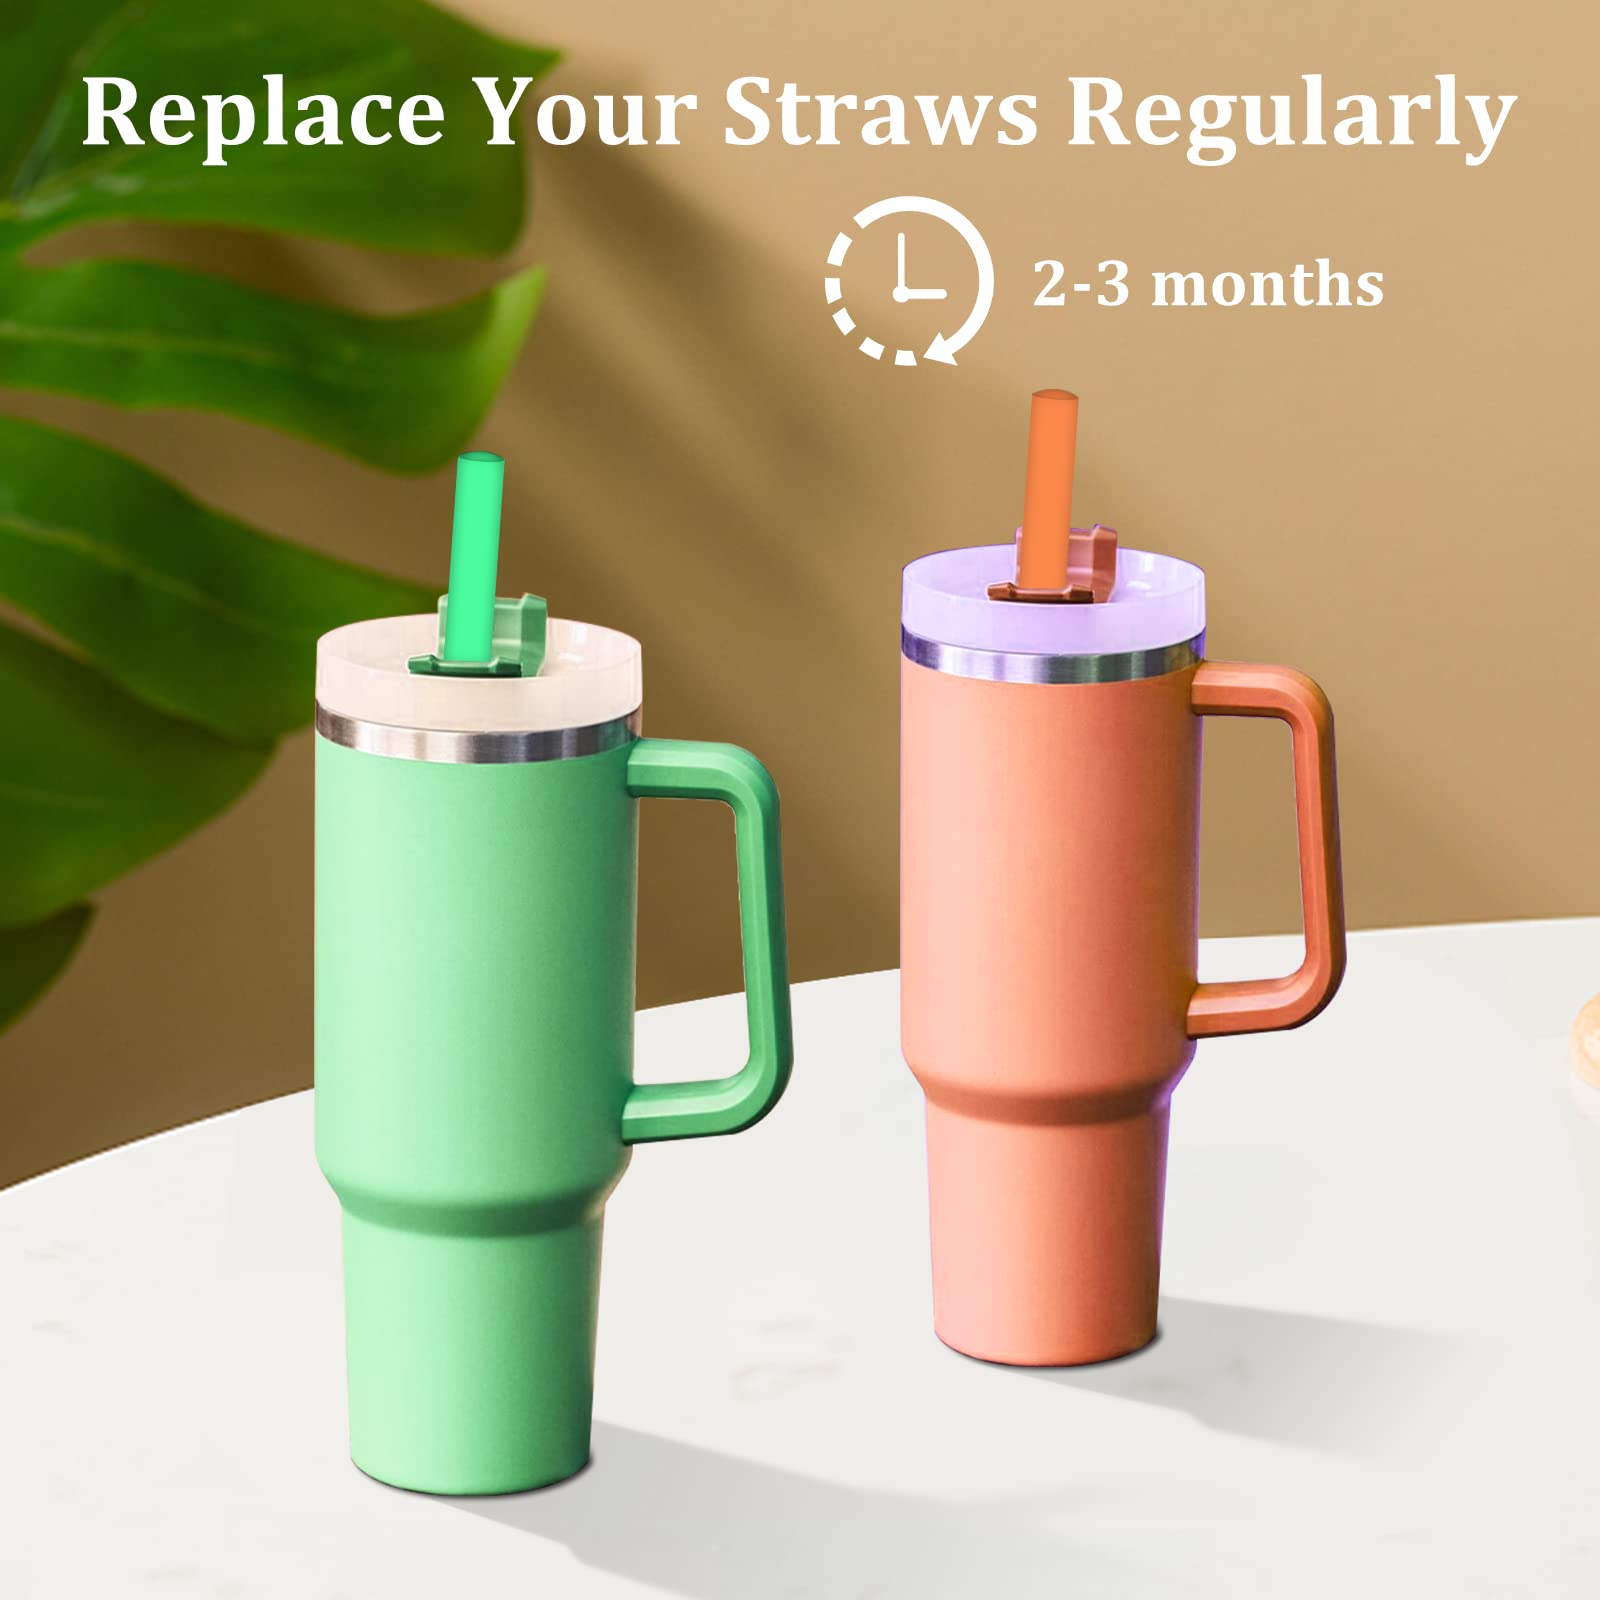 Silicone Replacement Straws for Stanley 40 oz 30 oz Cup Tumbler -6 PCS Straws Replacement for Stanley Adventure Travel Tumbler, Straw with Cup Cleaner for Stanley 40 oz 30 oz Cup